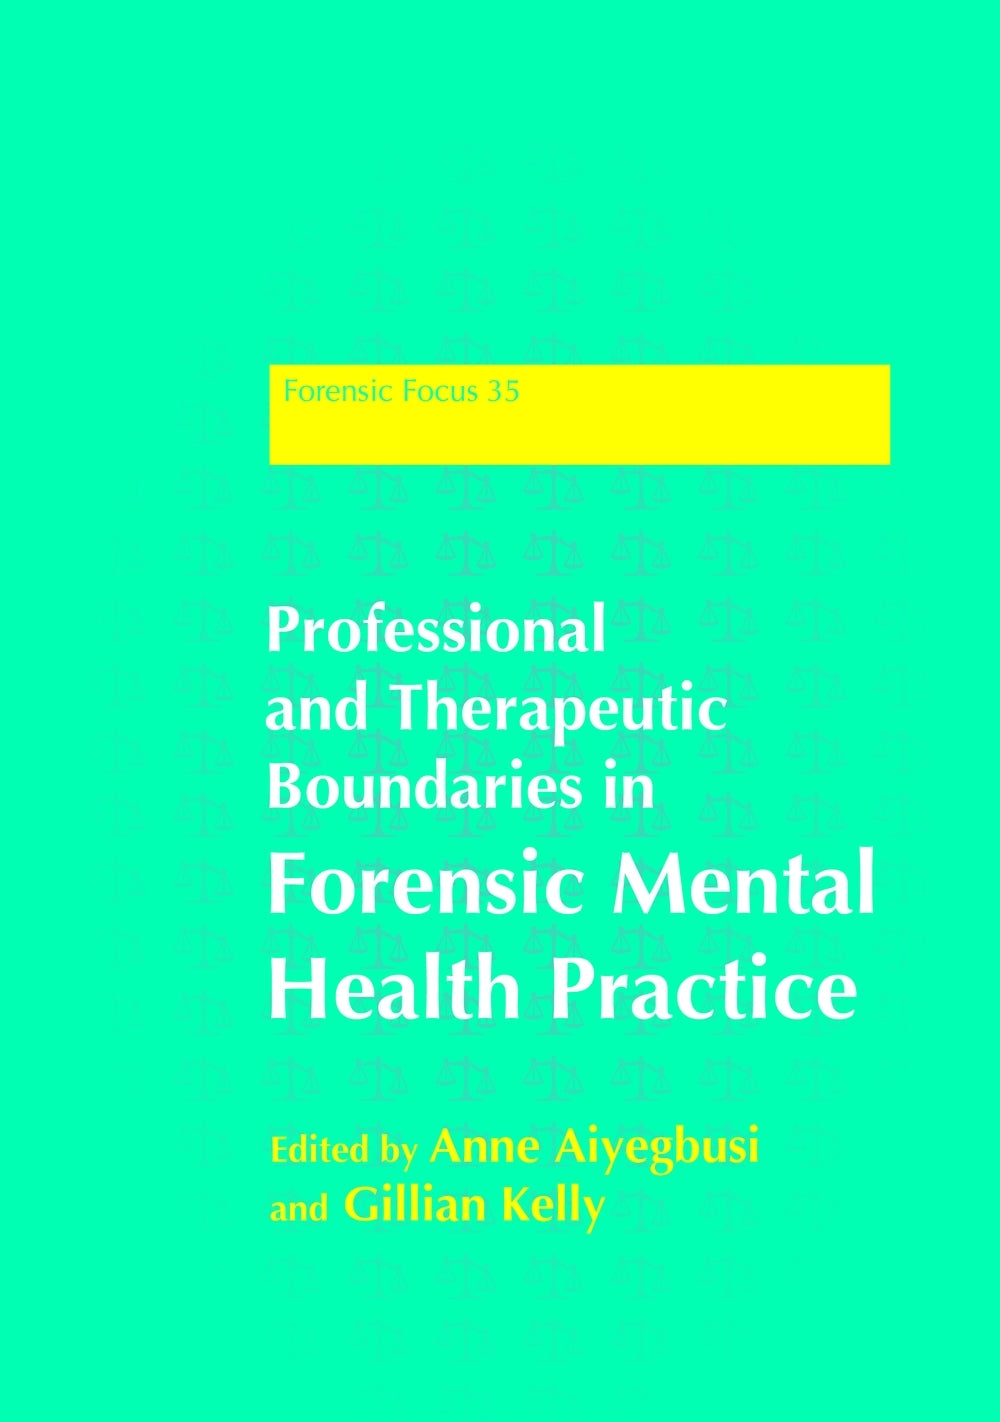 Professional and Therapeutic Boundaries in Forensic Mental Health Practice by Anne Aiyegbusi, Gillian Kelly